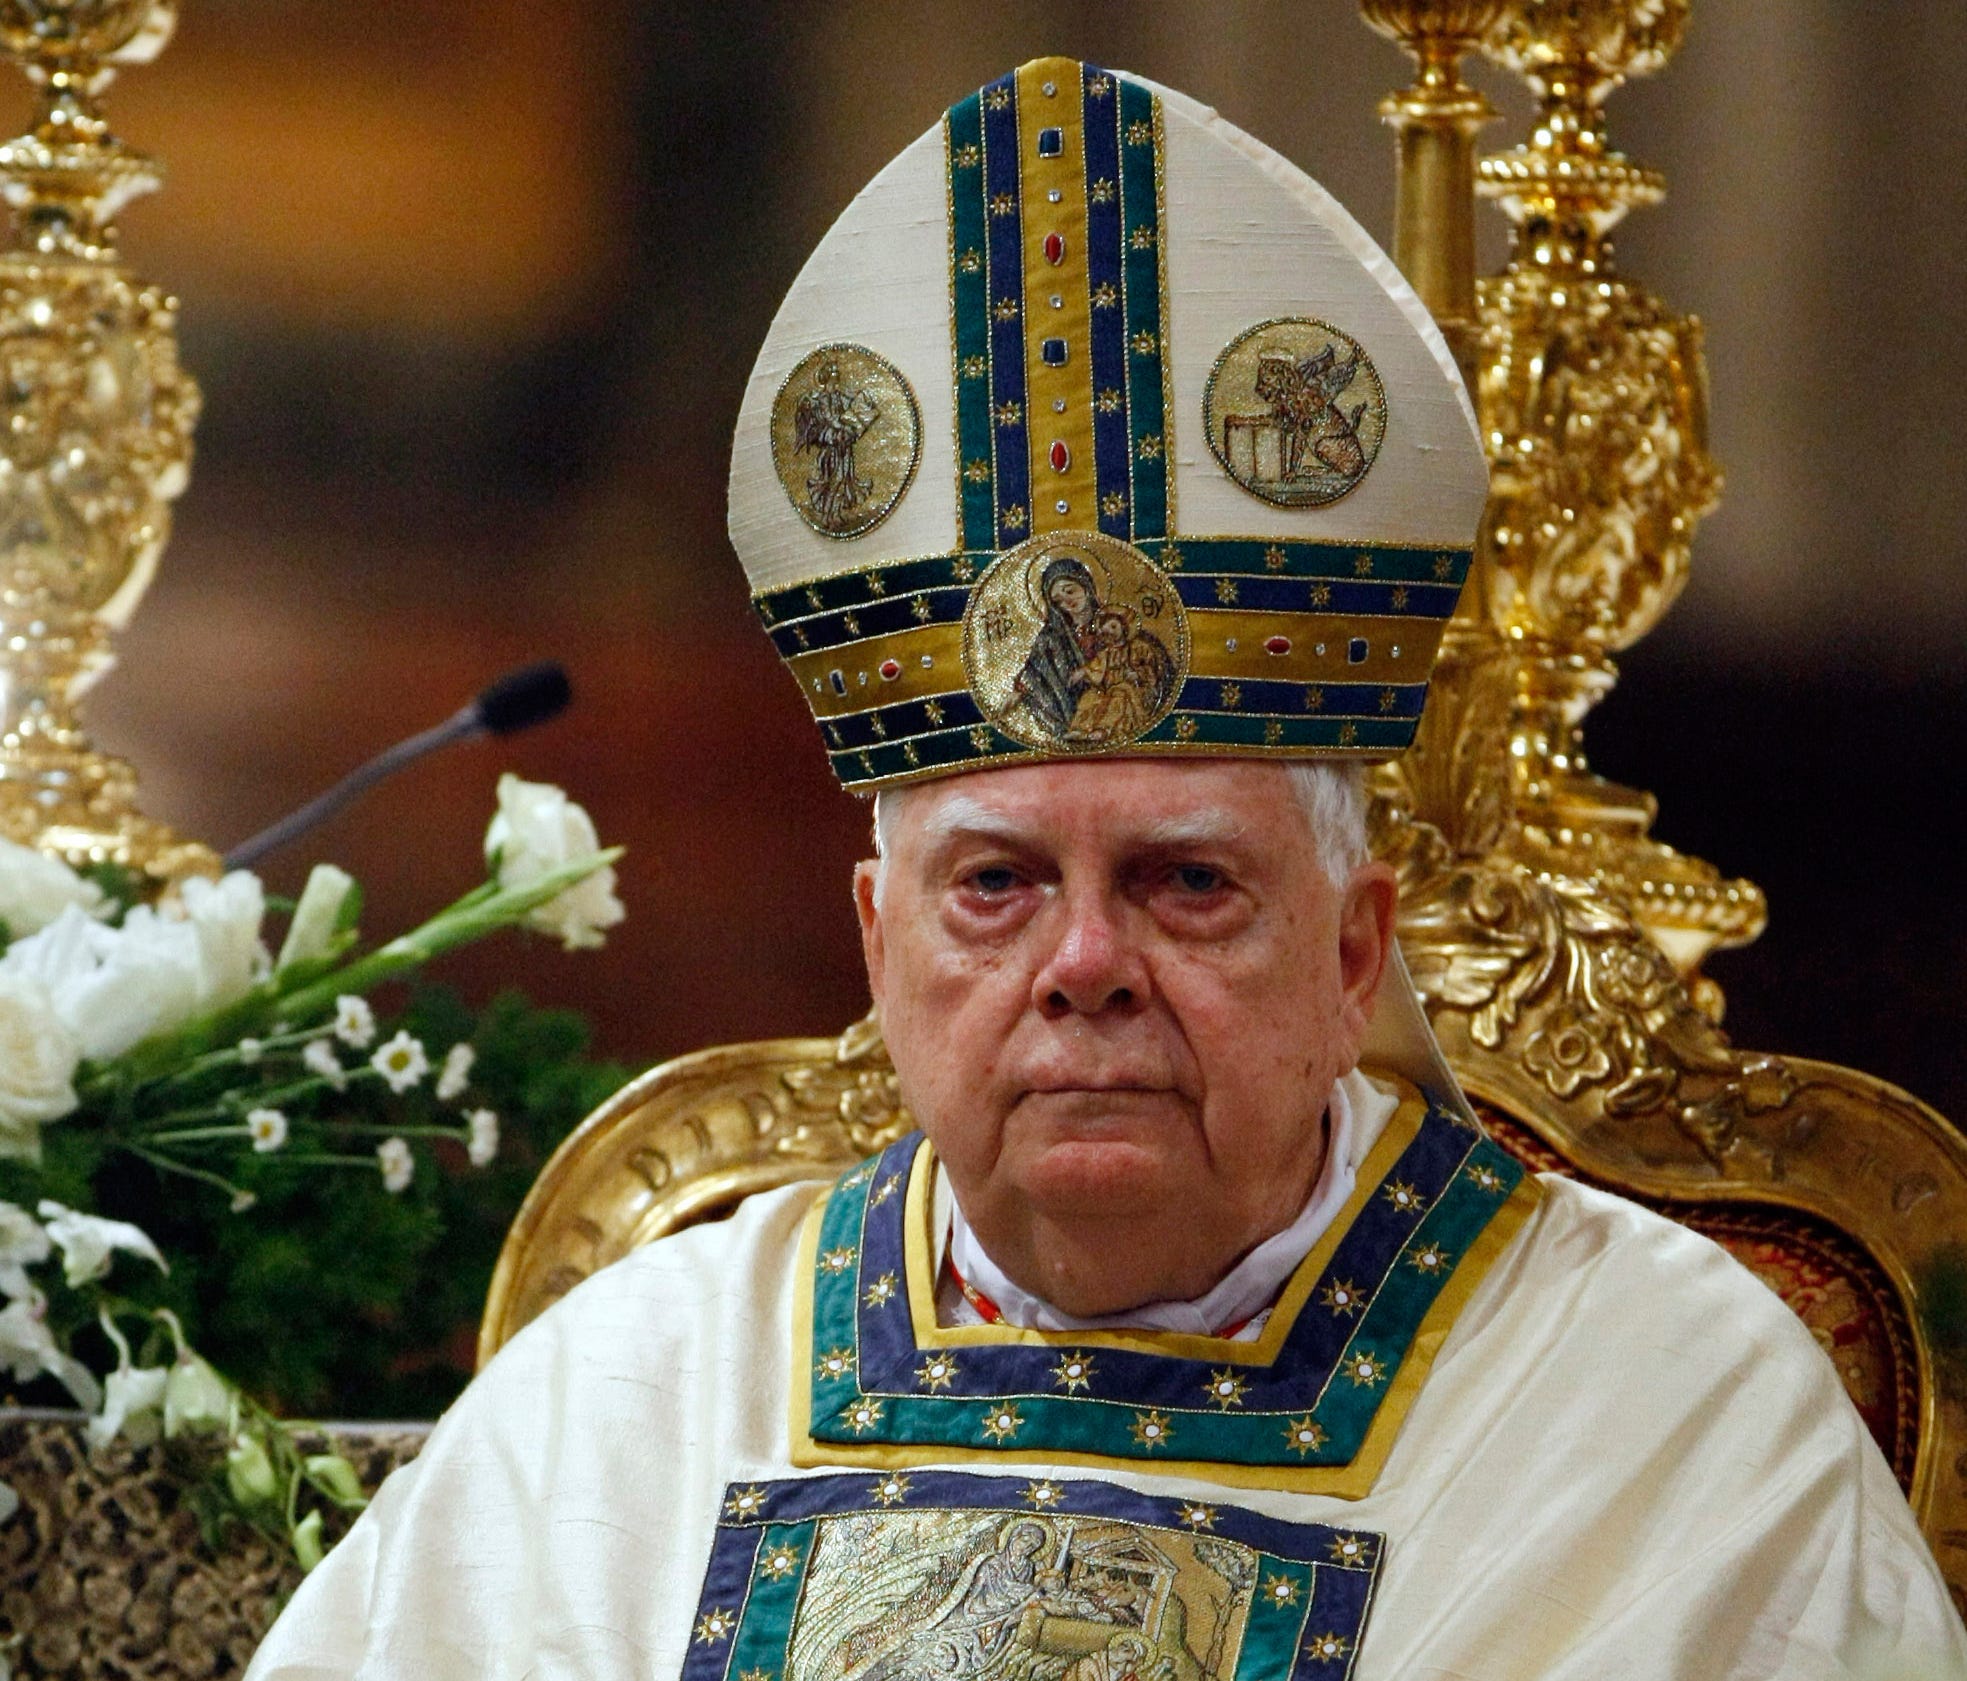 Cardinal Bernard Law as he celebrates Mass during a ceremony for Our Lady of the Snows in St. Mary Major's Basilica, in Rome on Aug. 5, 2010.